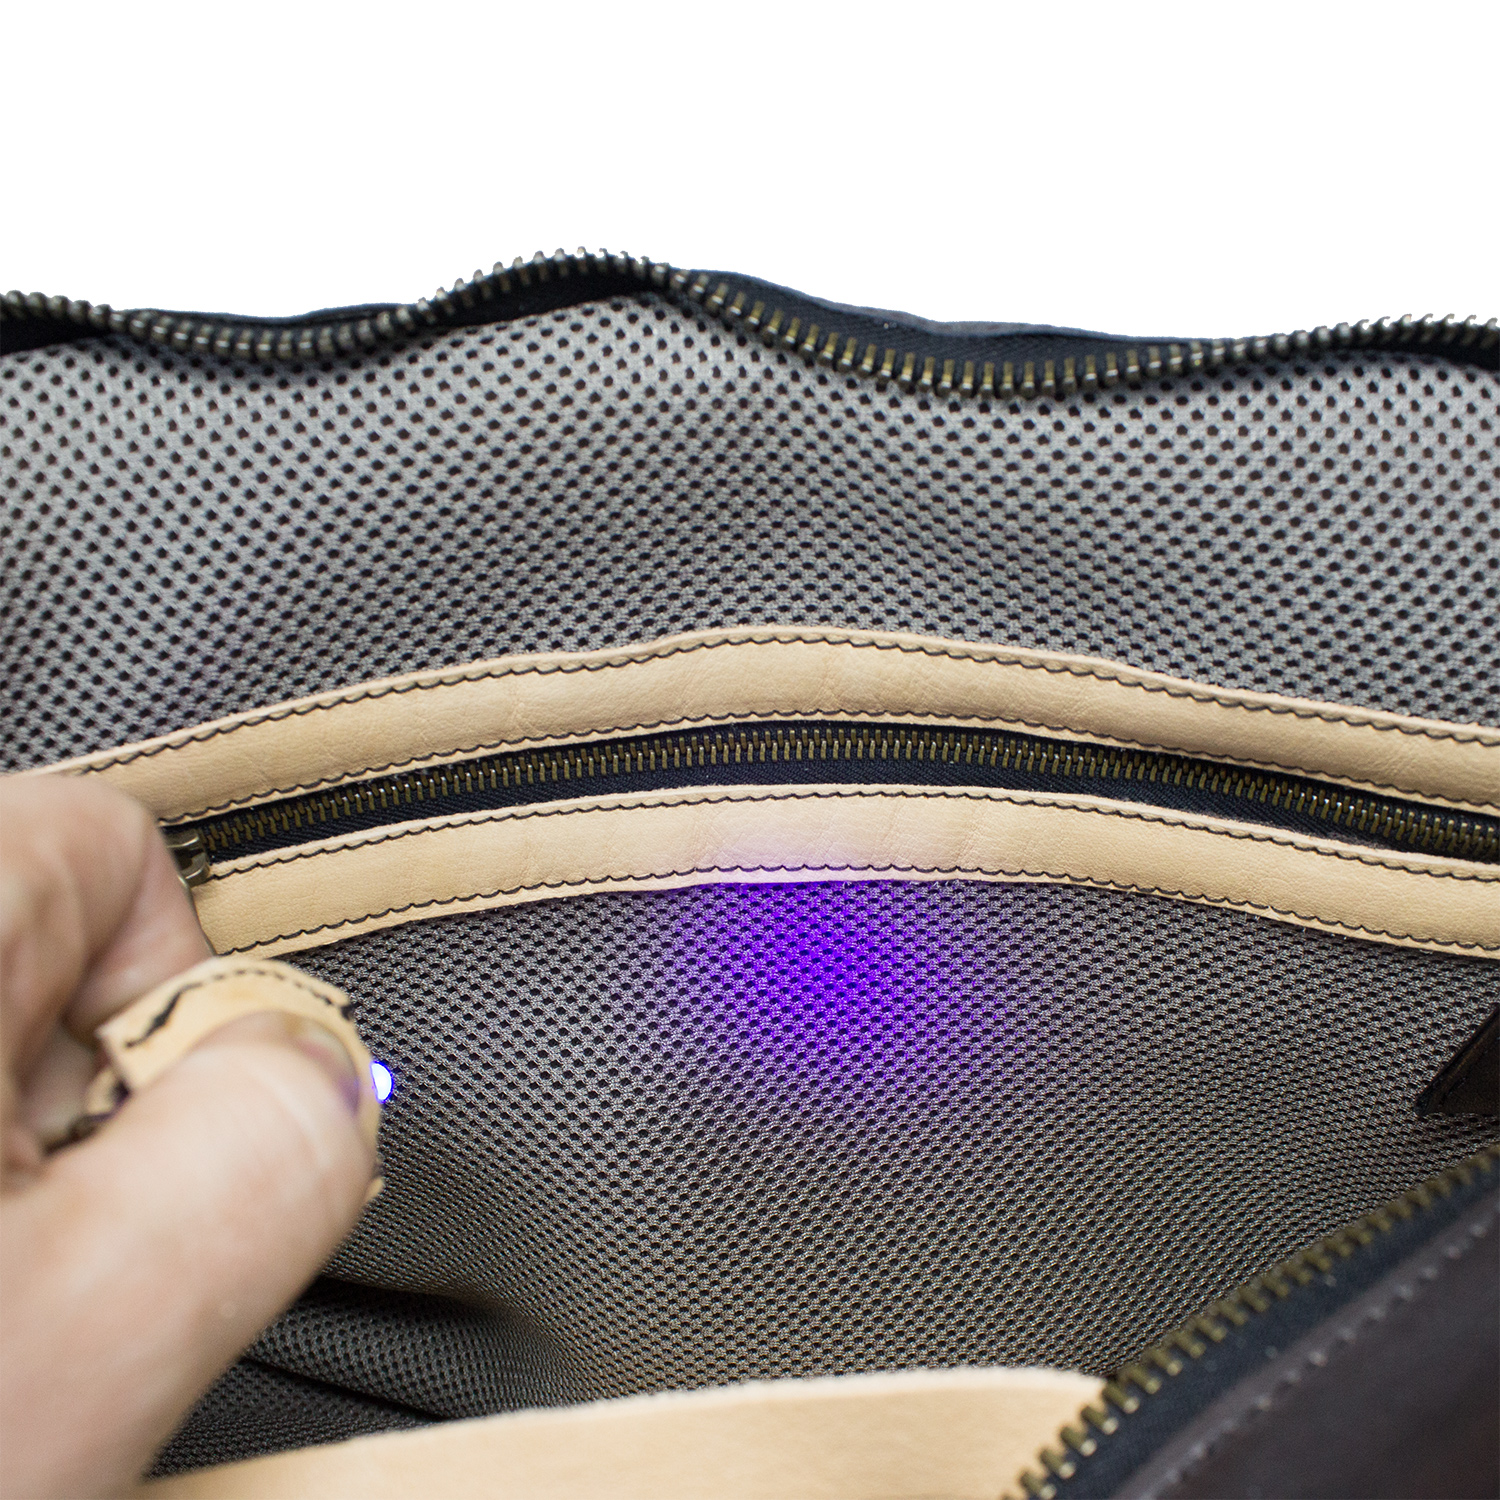 Men's leather shoulder bag for laptop with LED light placed inside the bag facilitates the visualization of the contents.